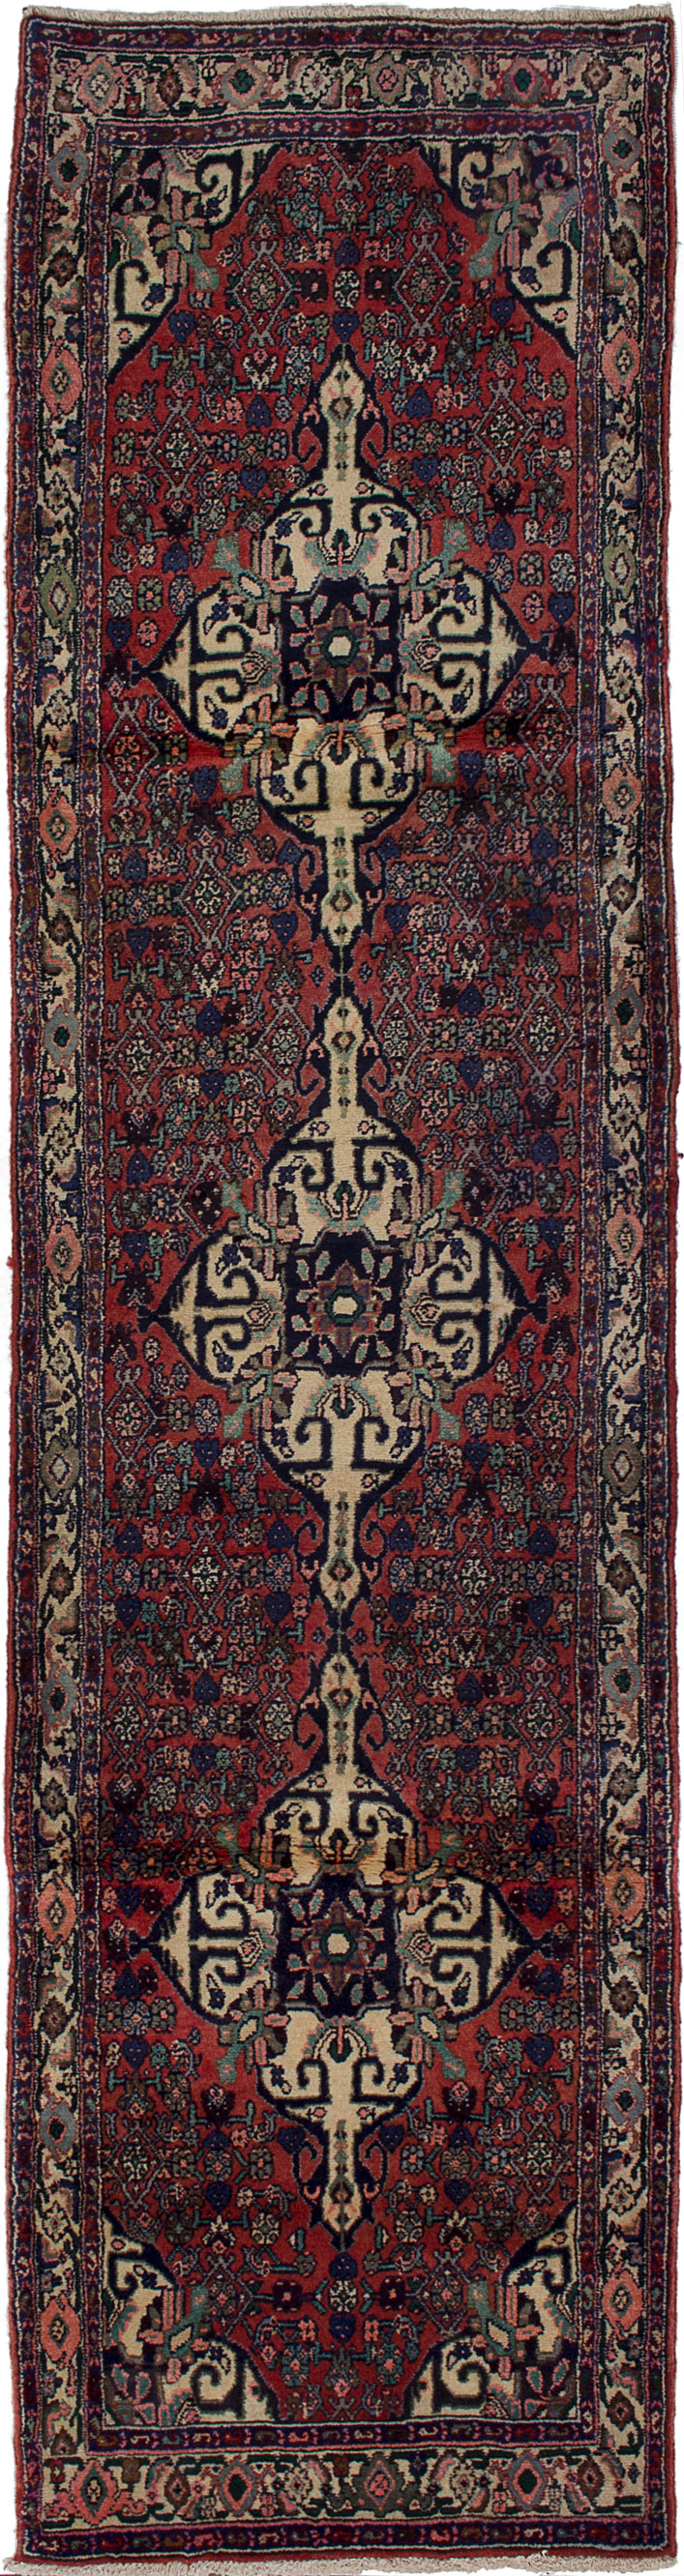 Hand-knotted Lilihan Dark Copper Wool Rug 2'6" x 9'11" Size: 2'6" x 9'11"  